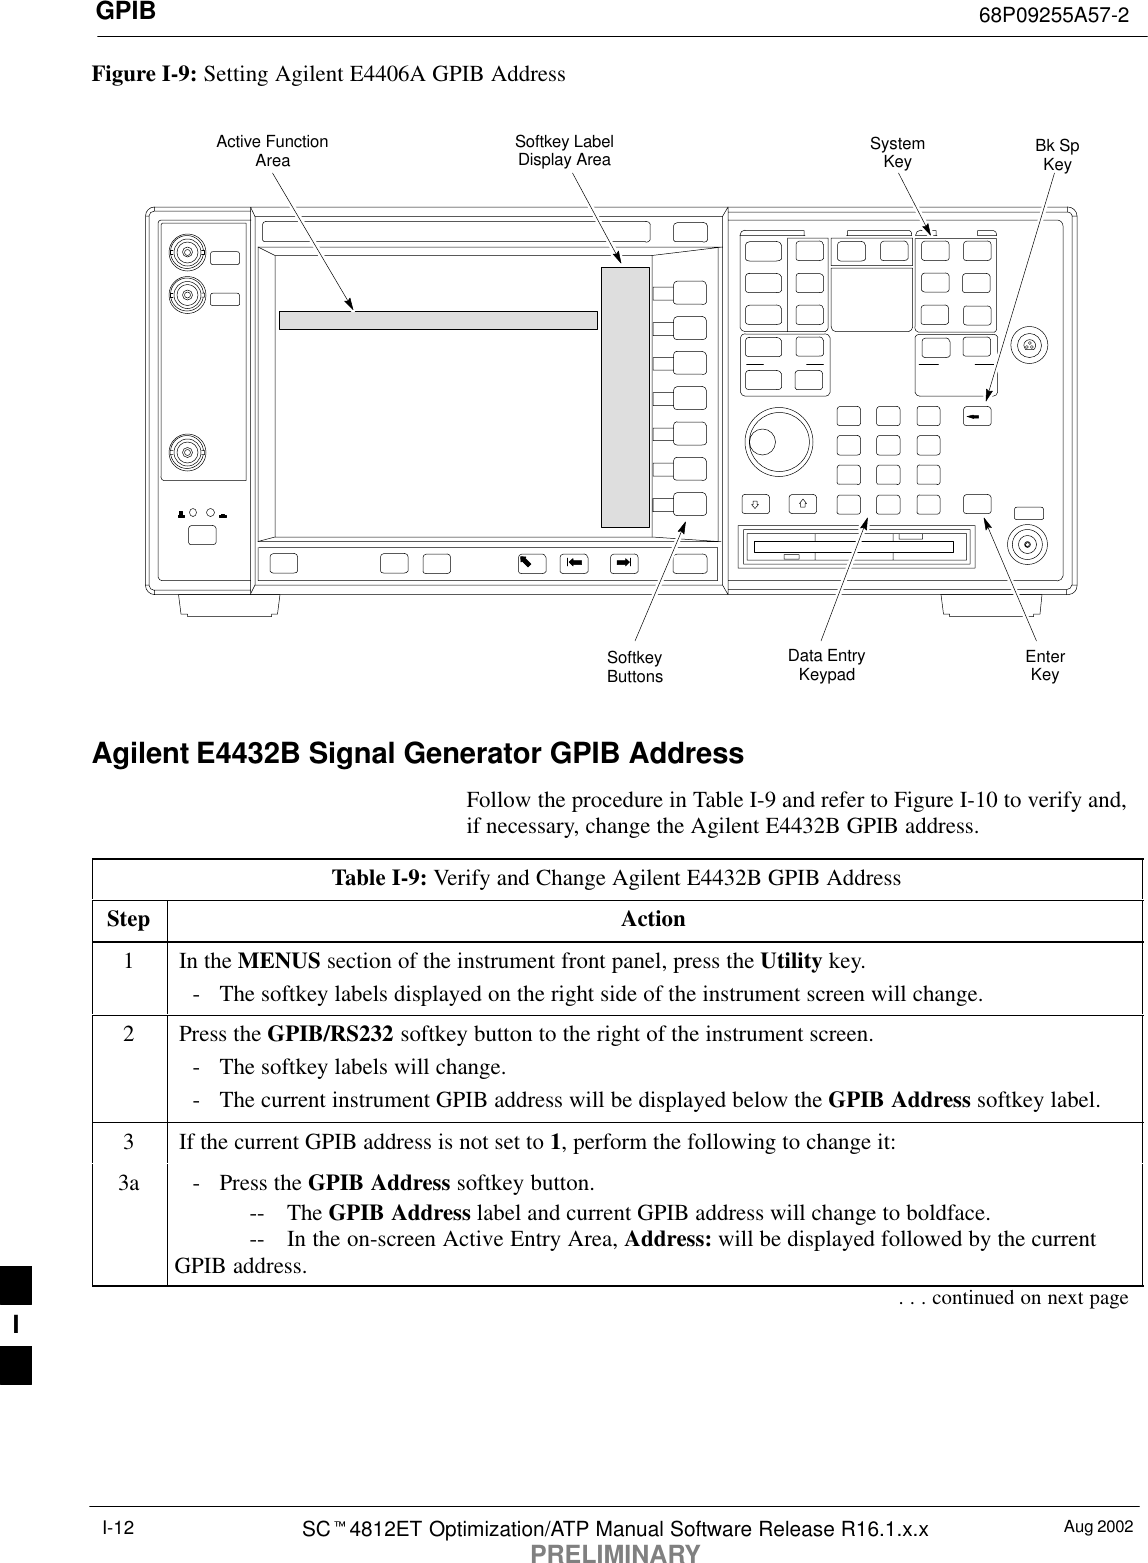 GPIB 68P09255A57-2Aug 2002SCt4812ET Optimization/ATP Manual Software Release R16.1.x.xPRELIMINARYI-12Figure I-9: Setting Agilent E4406A GPIB AddressSystemKey Bk SpKeyEnterKeyData EntryKeypadSoftkeyButtonsSoftkey LabelDisplay AreaActive FunctionAreaAgilent E4432B Signal Generator GPIB AddressFollow the procedure in Table I-9 and refer to Figure I-10 to verify and,if necessary, change the Agilent E4432B GPIB address.Table I-9: Verify and Change Agilent E4432B GPIB AddressStep Action1In the MENUS section of the instrument front panel, press the Utility key.- The softkey labels displayed on the right side of the instrument screen will change.2Press the GPIB/RS232 softkey button to the right of the instrument screen.- The softkey labels will change.- The current instrument GPIB address will be displayed below the GPIB Address softkey label.3If the current GPIB address is not set to 1, perform the following to change it:3a - Press the GPIB Address softkey button.-- The GPIB Address label and current GPIB address will change to boldface.-- In the on-screen Active Entry Area, Address: will be displayed followed by the currentGPIB address.. . . continued on next pageI